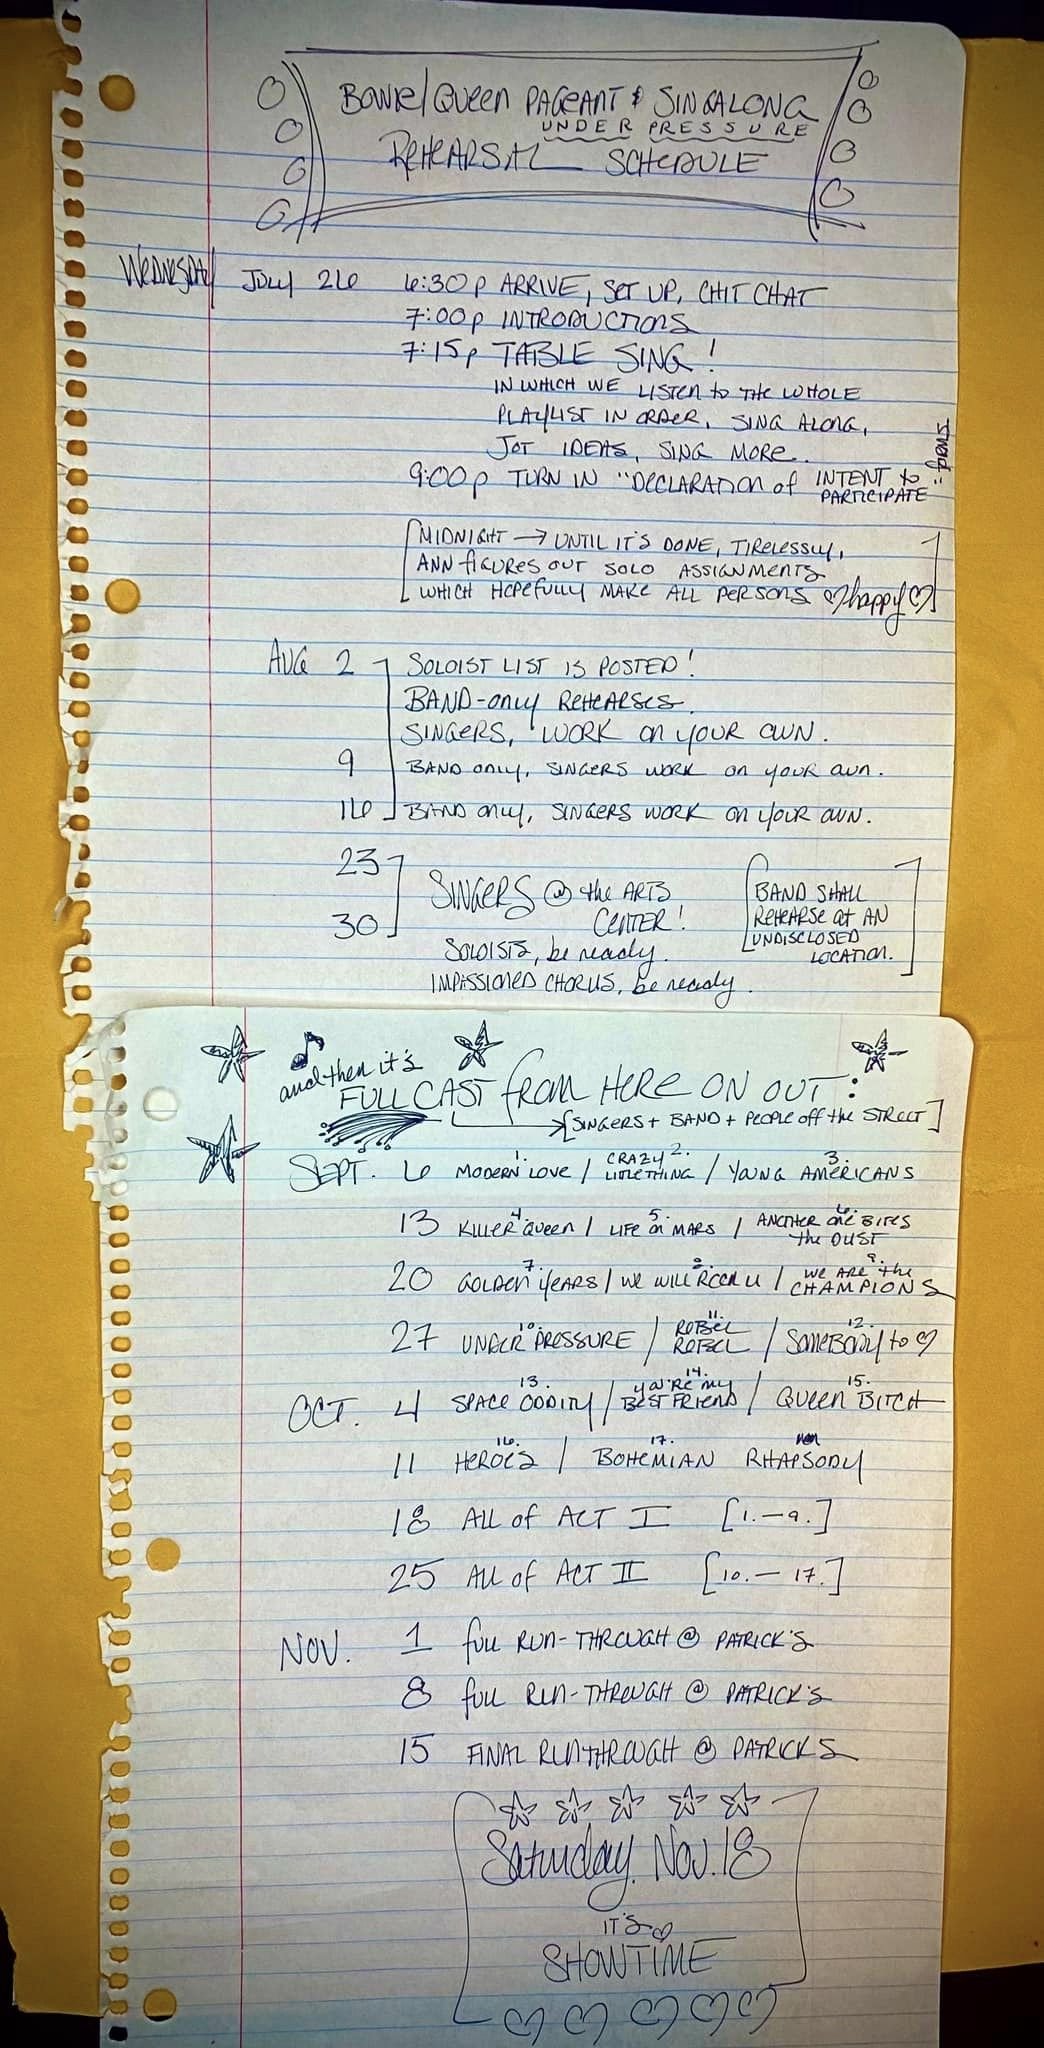 Handwritten instructions and timeline for Pageant & Singalong 2023